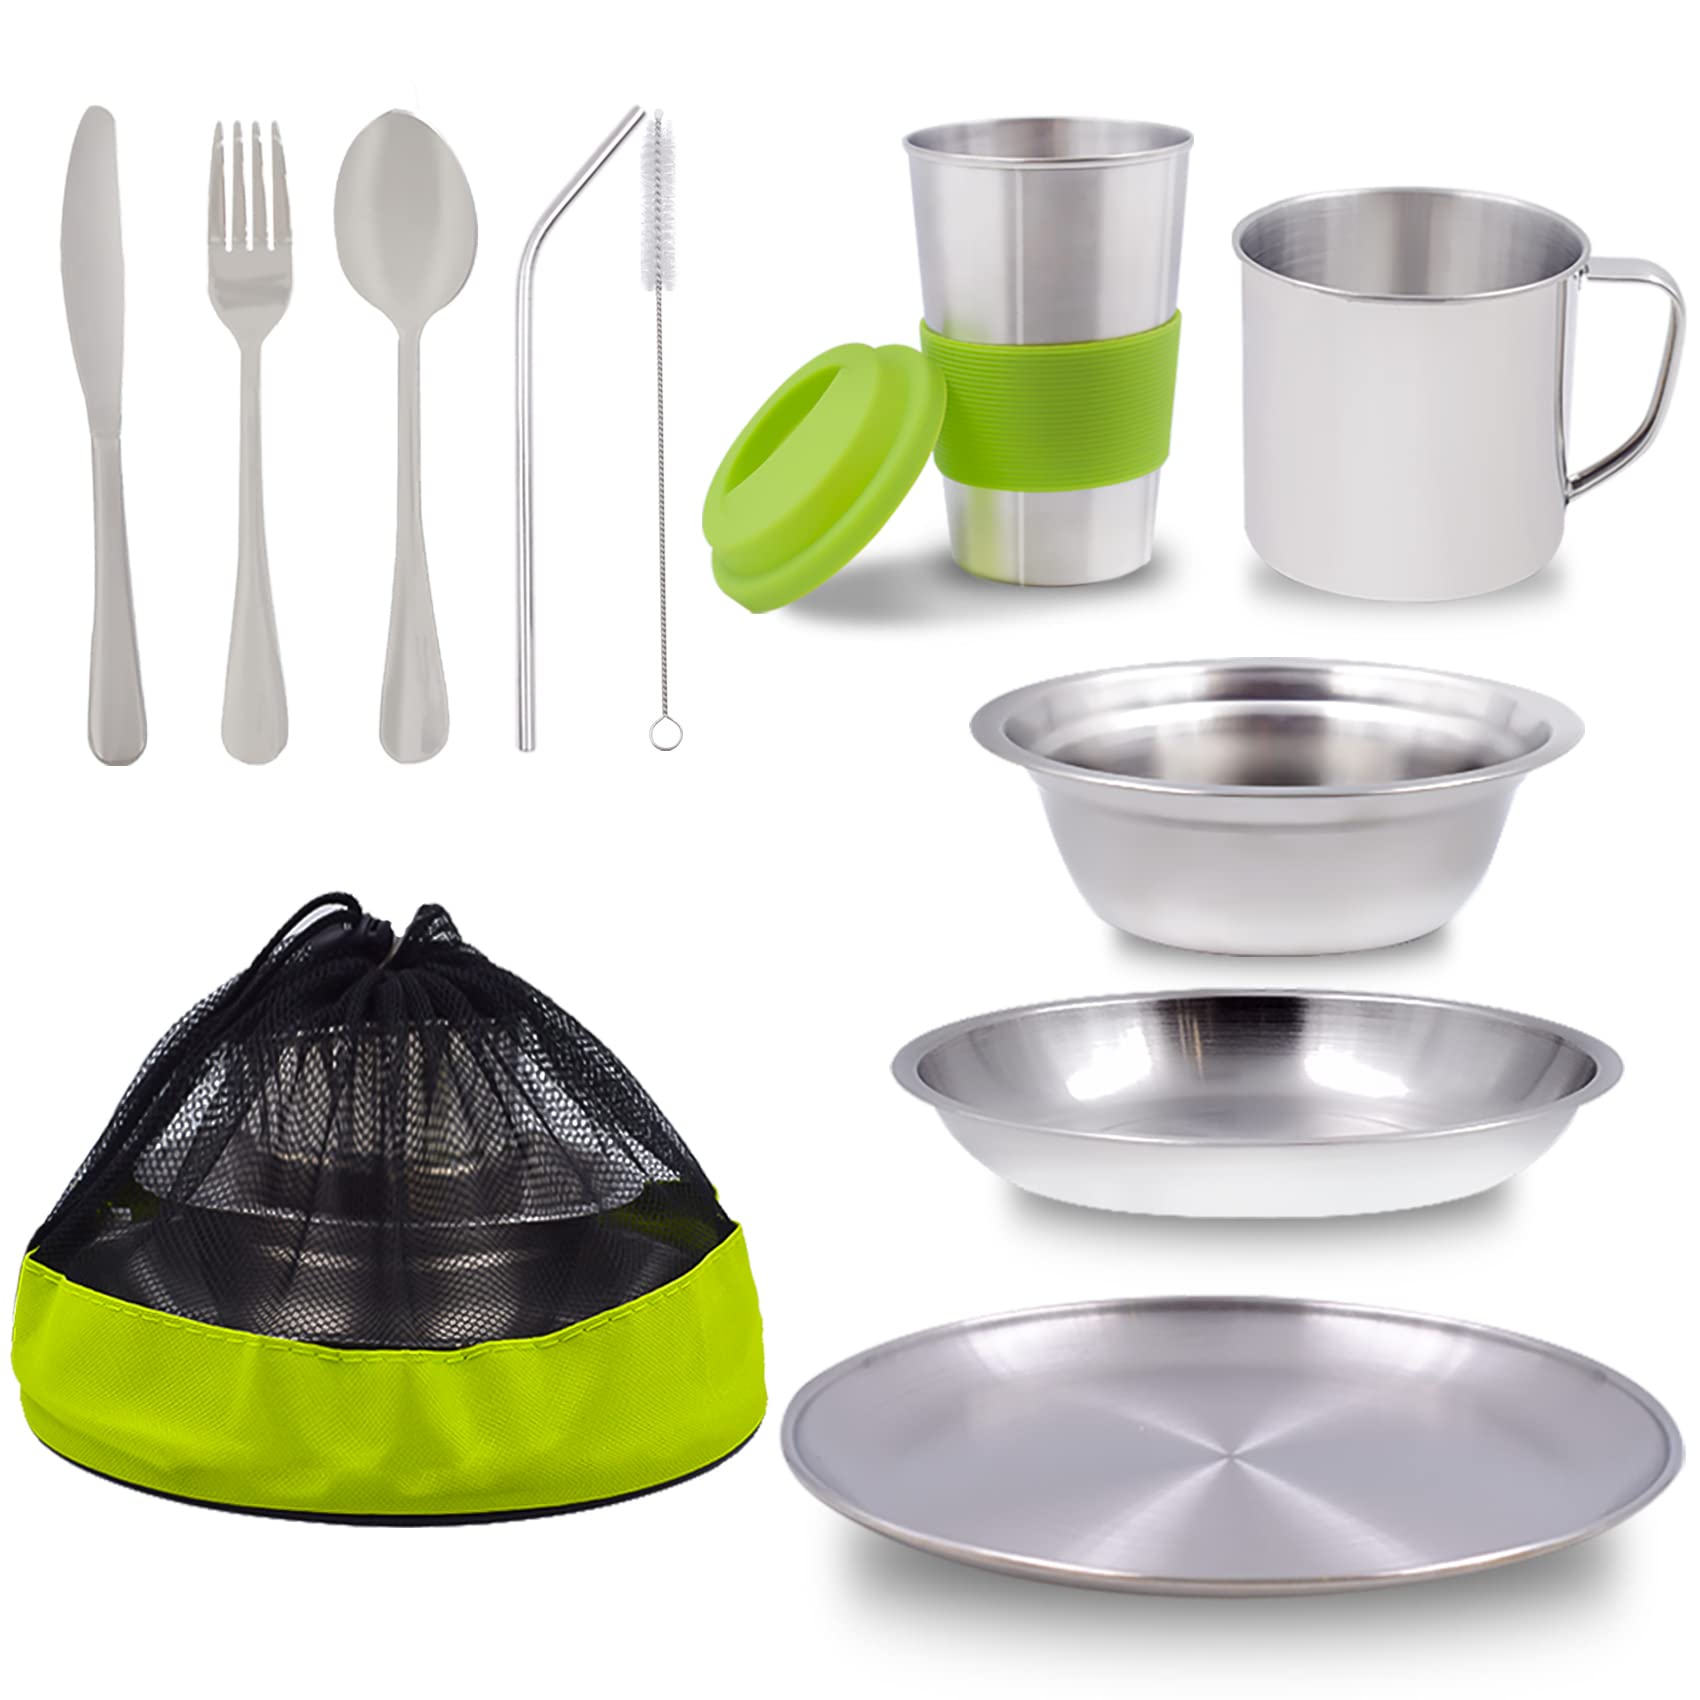 Stainless Steel Plates and Bowls Camping Dinnerware Set for Kids and Adults  with Travel Kit - Wealers